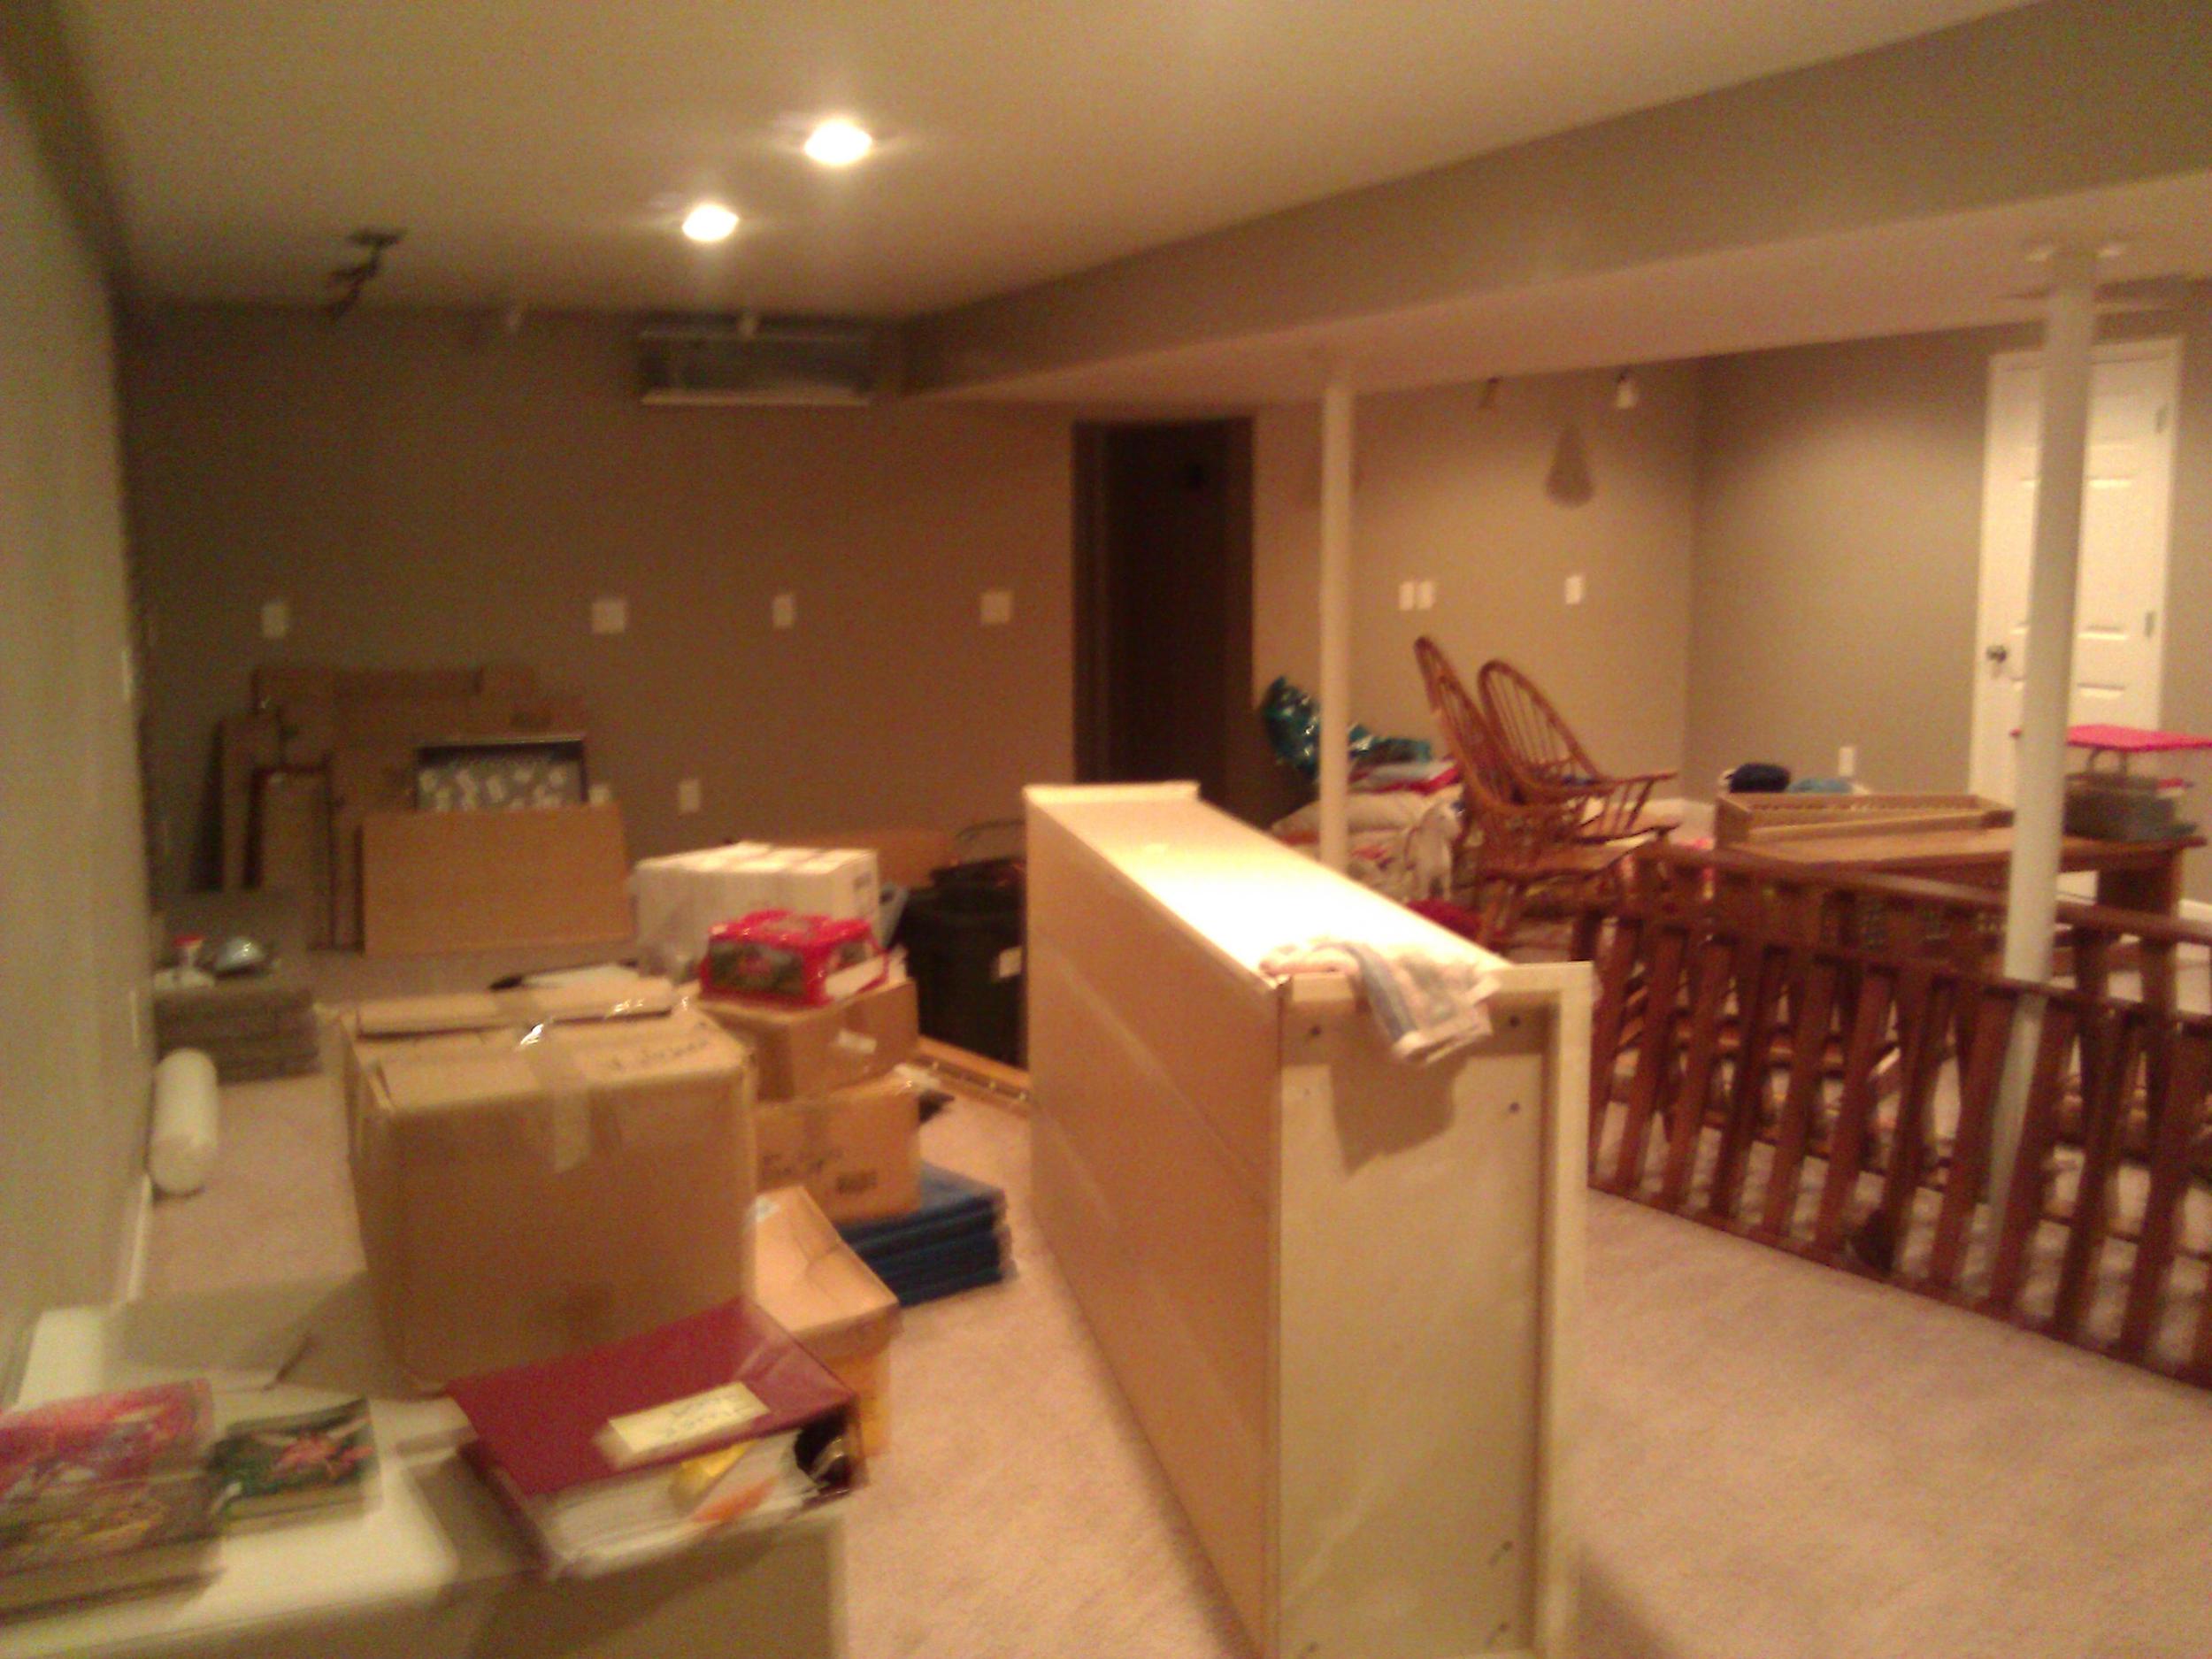 Our basement now.